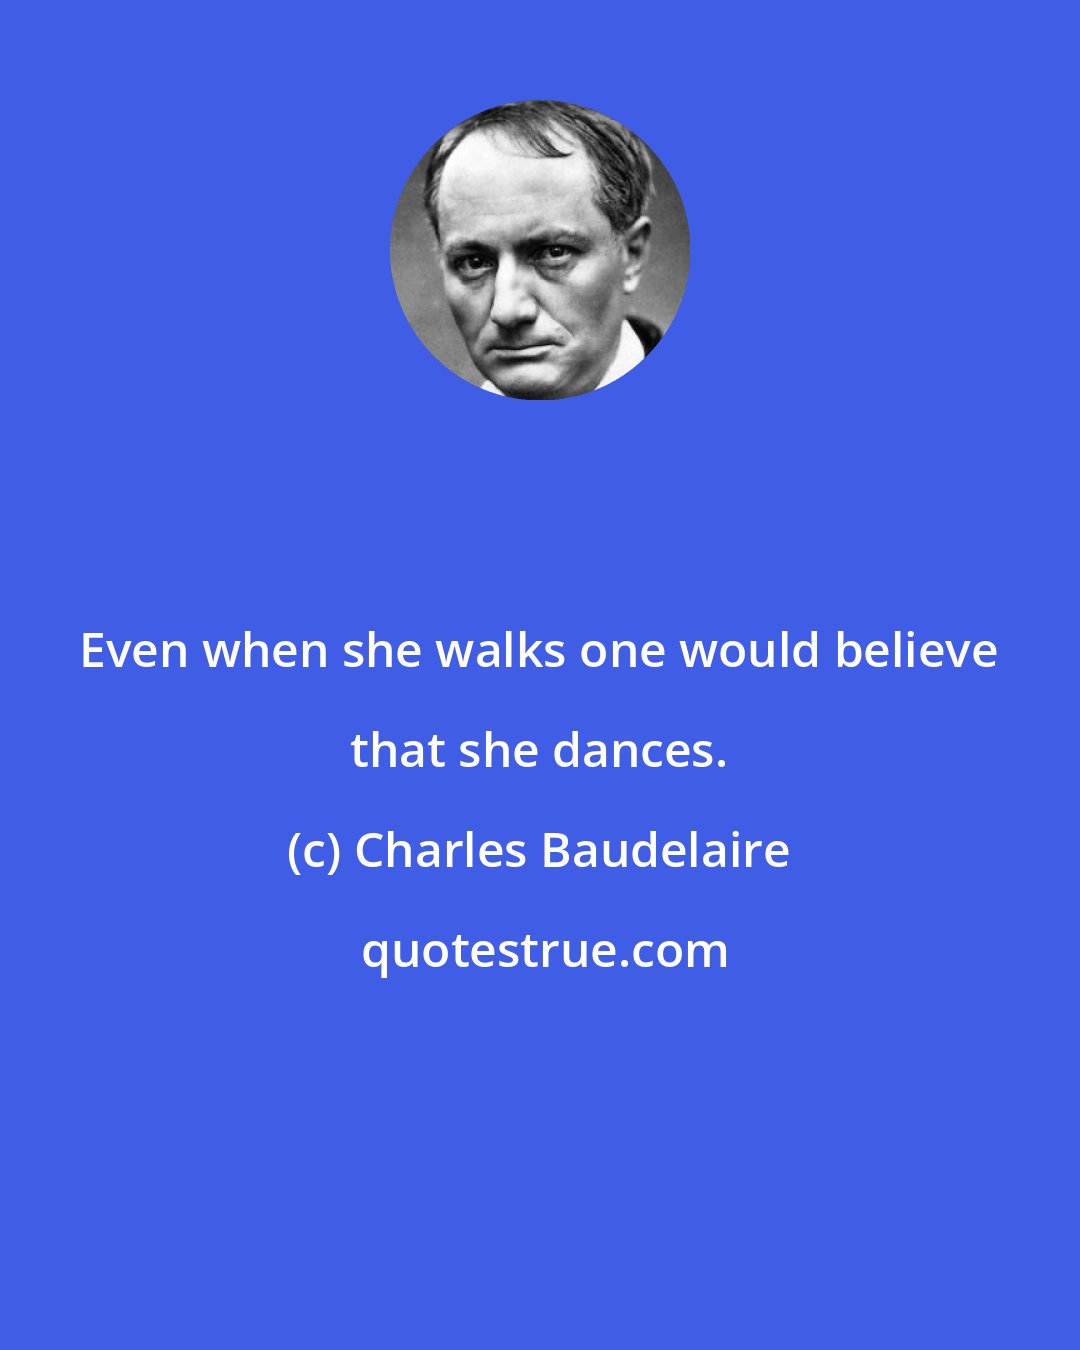 Charles Baudelaire: Even when she walks one would believe that she dances.